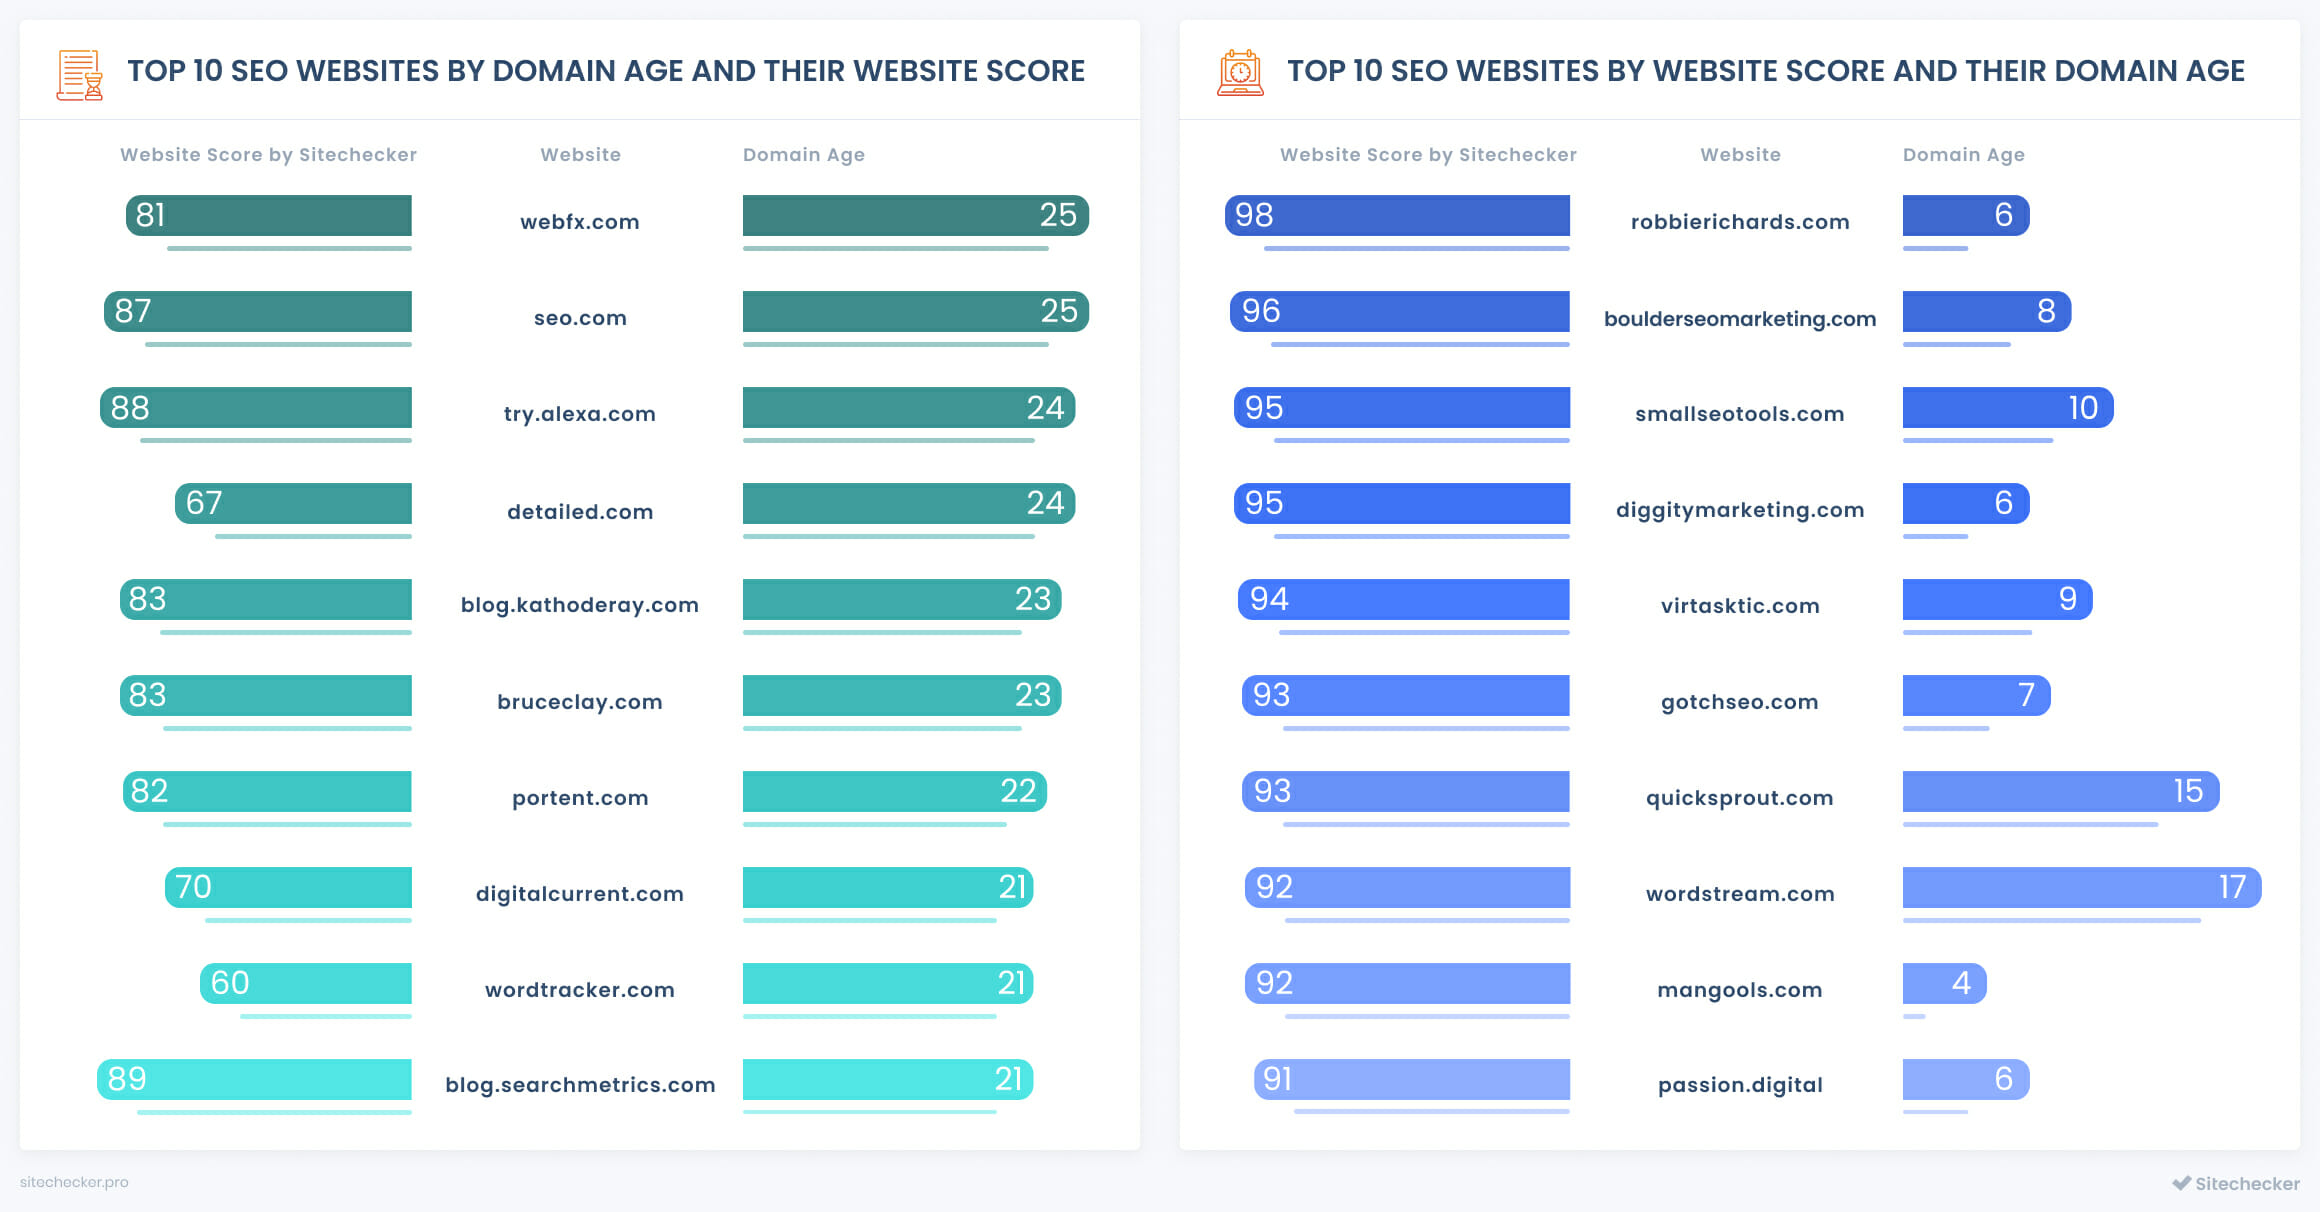 top seo companies by domain age and website score